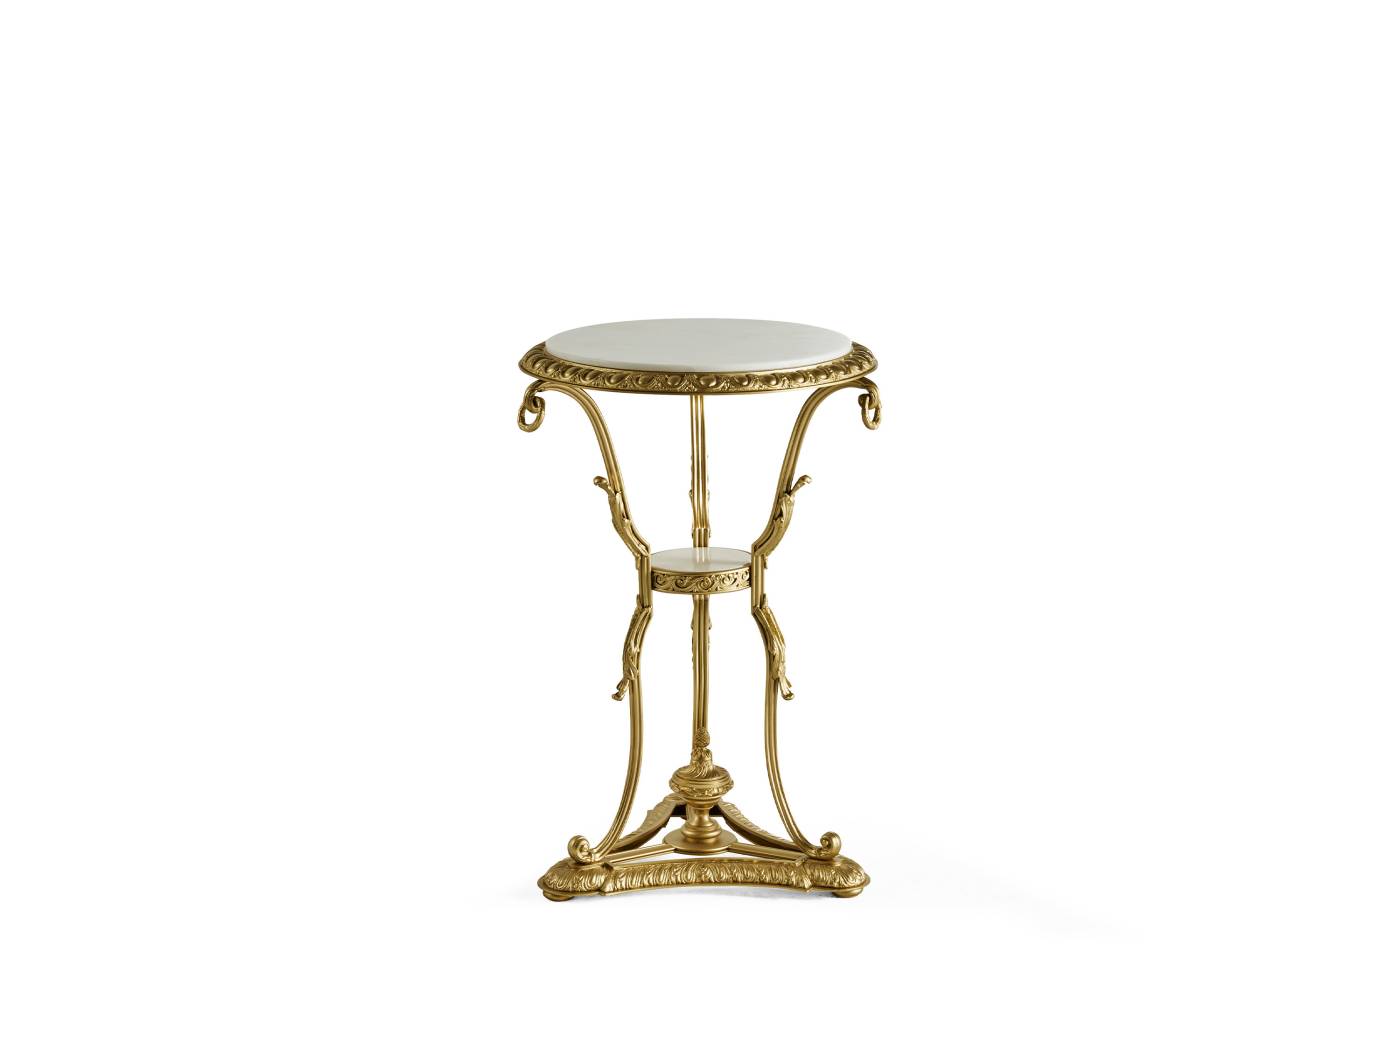 BIJOUX low table - Bespoke projects with luxury Made in Italy classic furniture